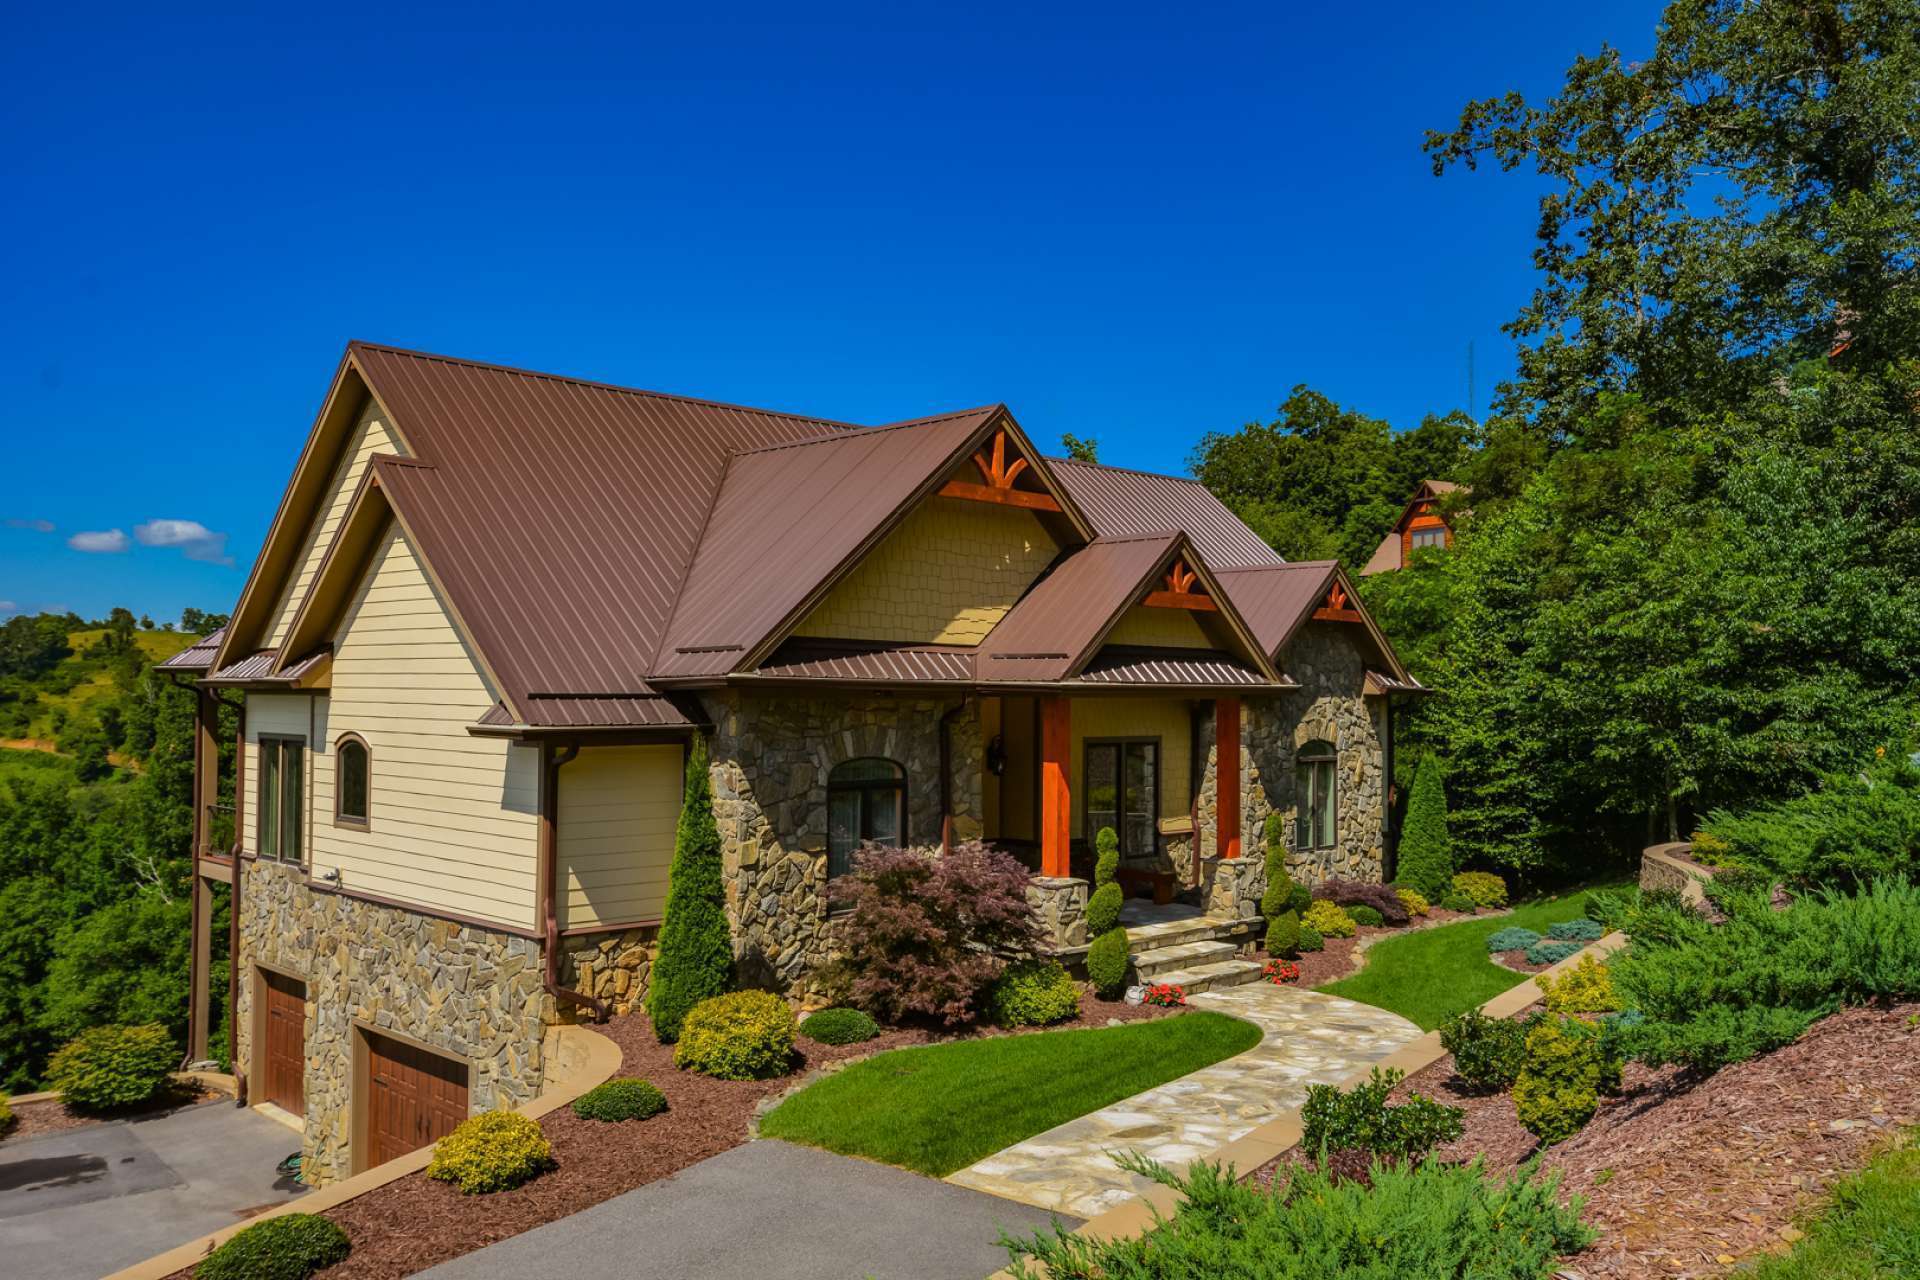 If you came to the mountains for breathtaking views, you must not miss this one-of-a-kind 3-bedroom, 2.5-bath craftsman-style home located in the prestigious Elk Ridge community of Todd in Southern Ashe County, NC.